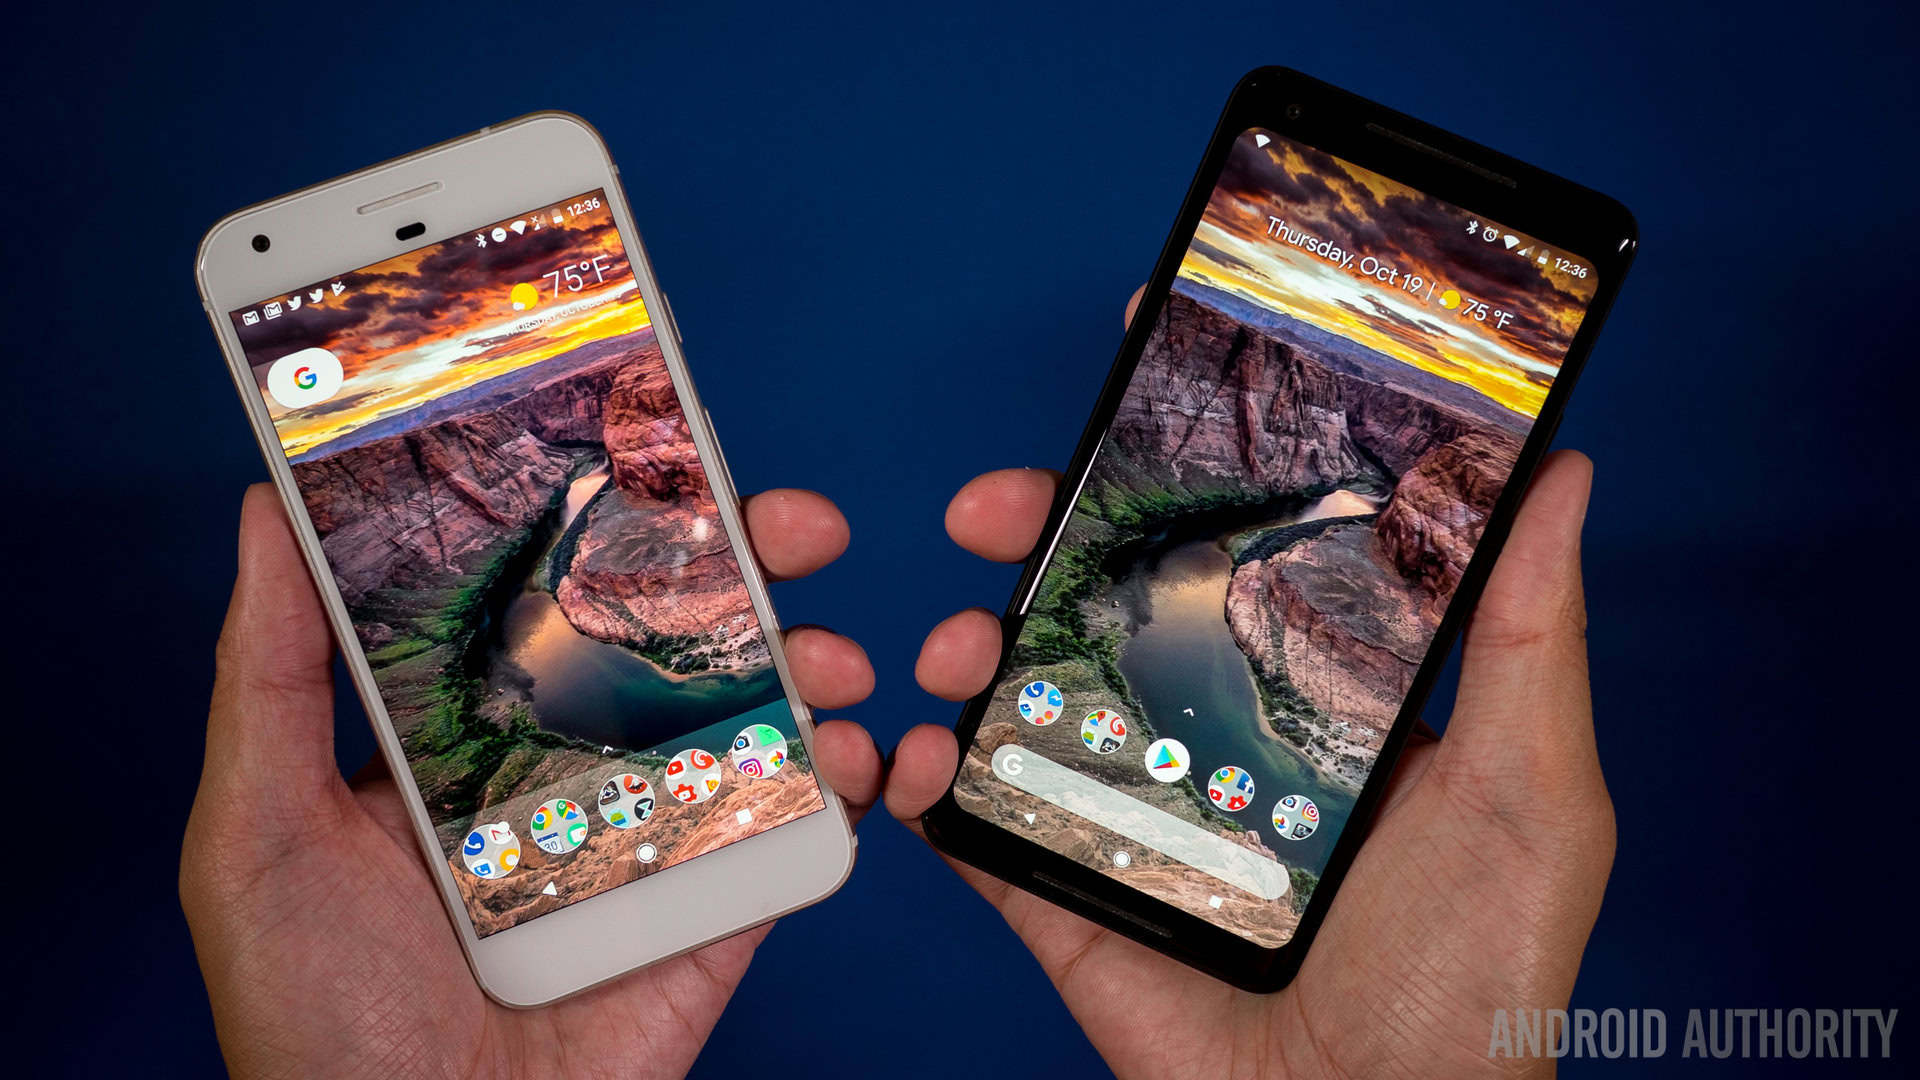 The Pixel 2 XL would be the best phone if its screen wasn't so